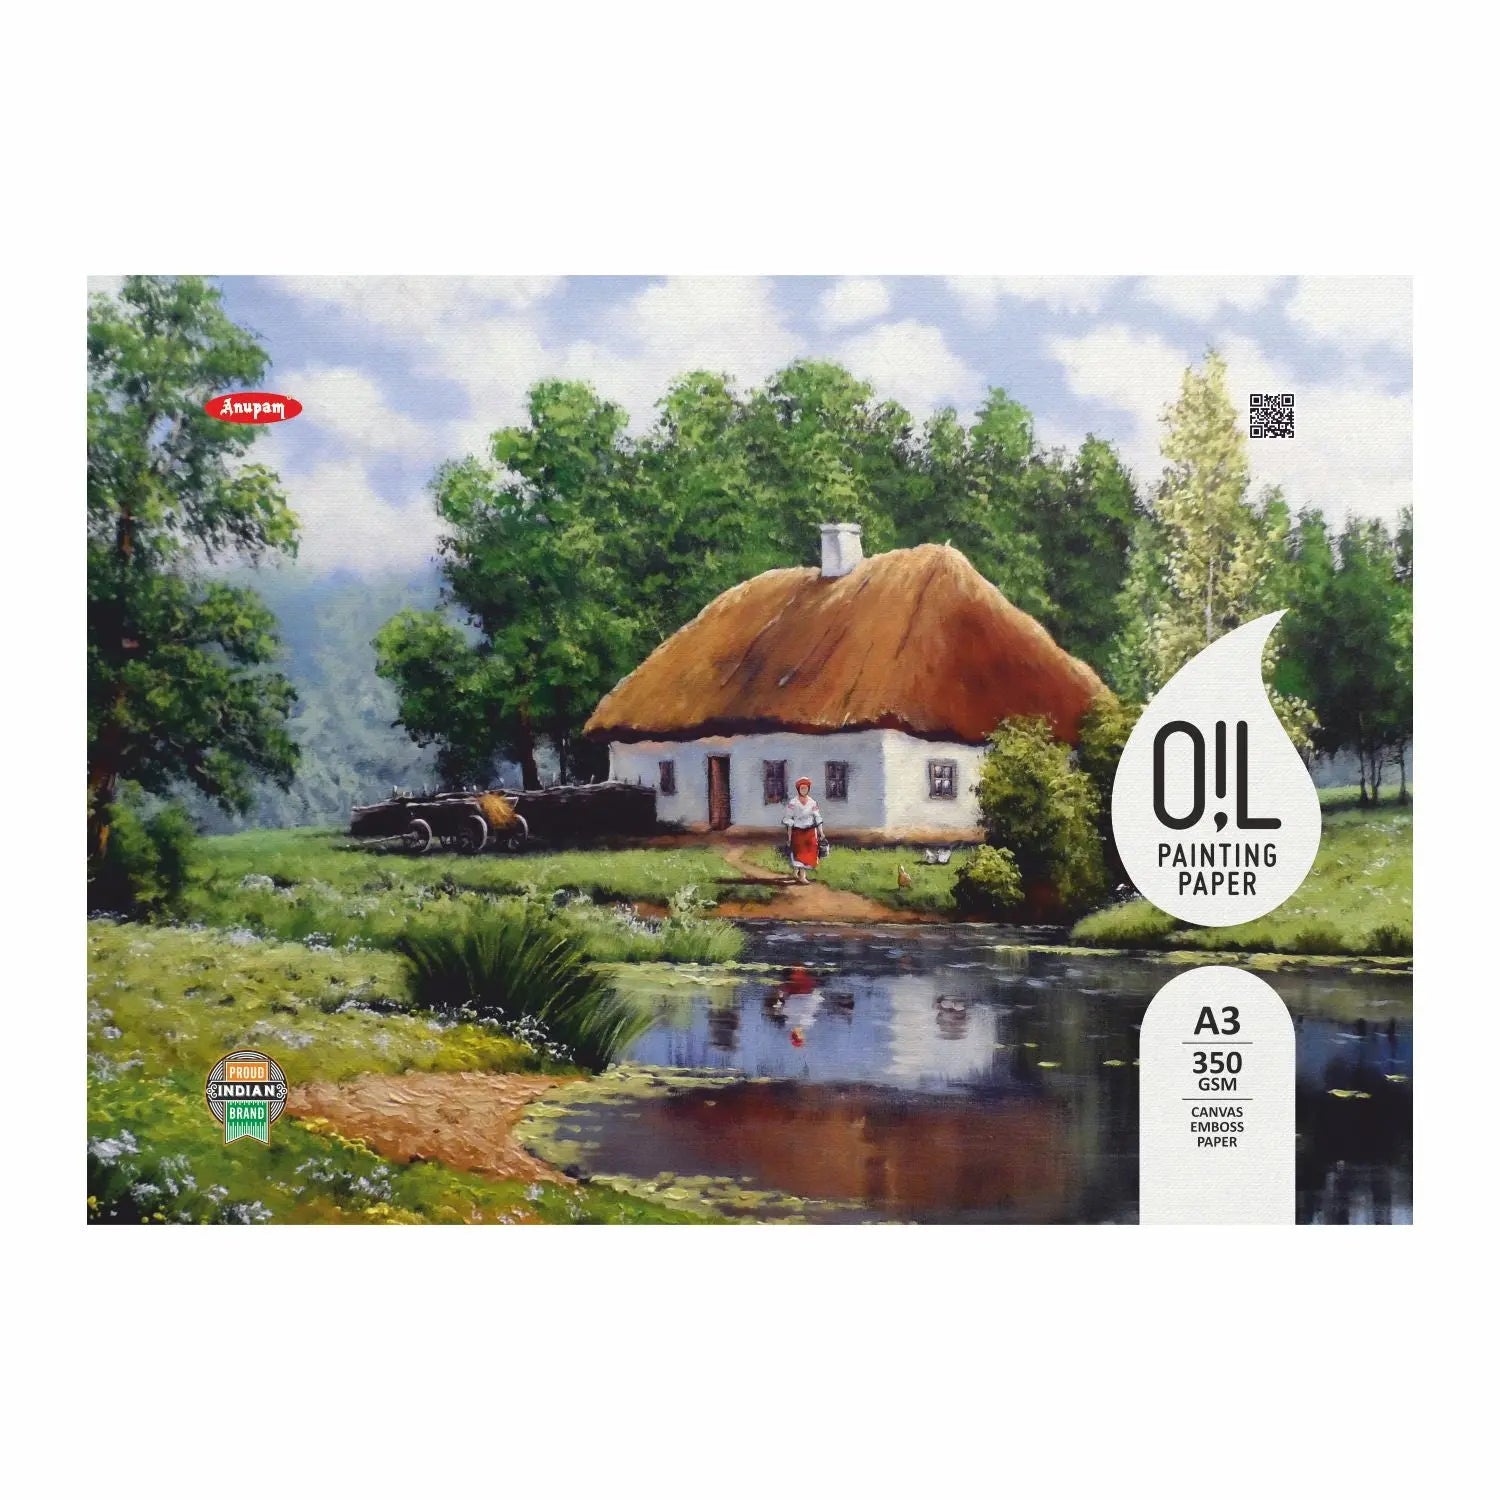 Anupam Oil Painting Paper Pad 350 GSM Canvazo